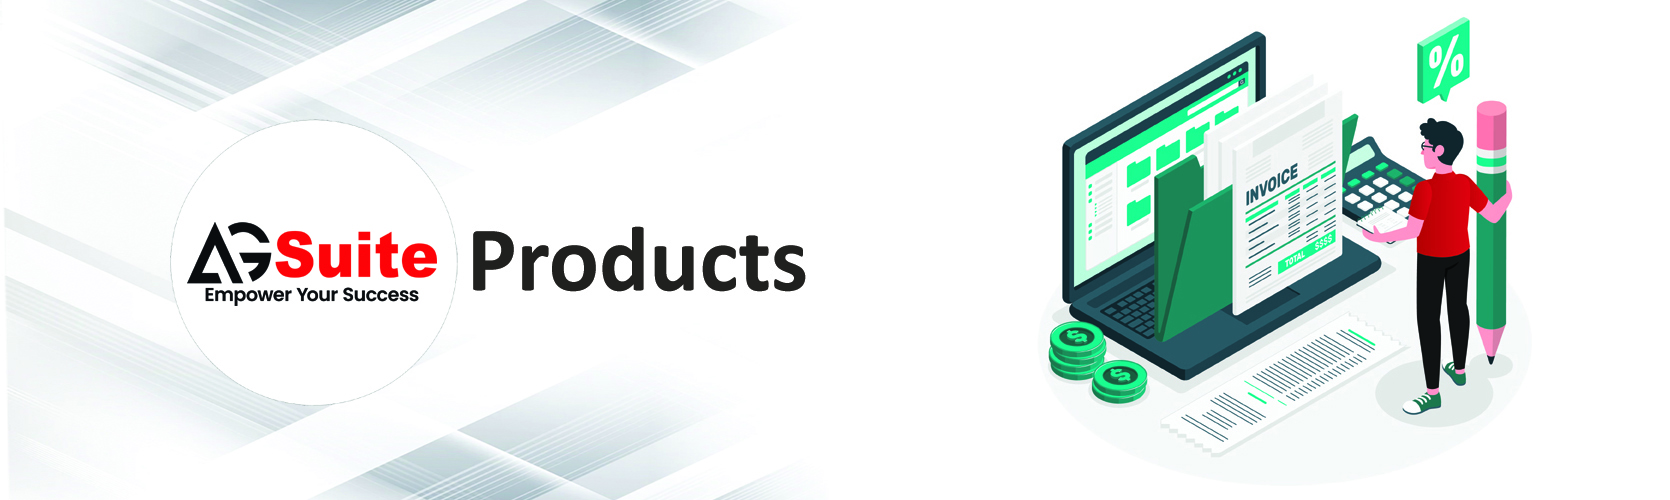 AGSuite Products